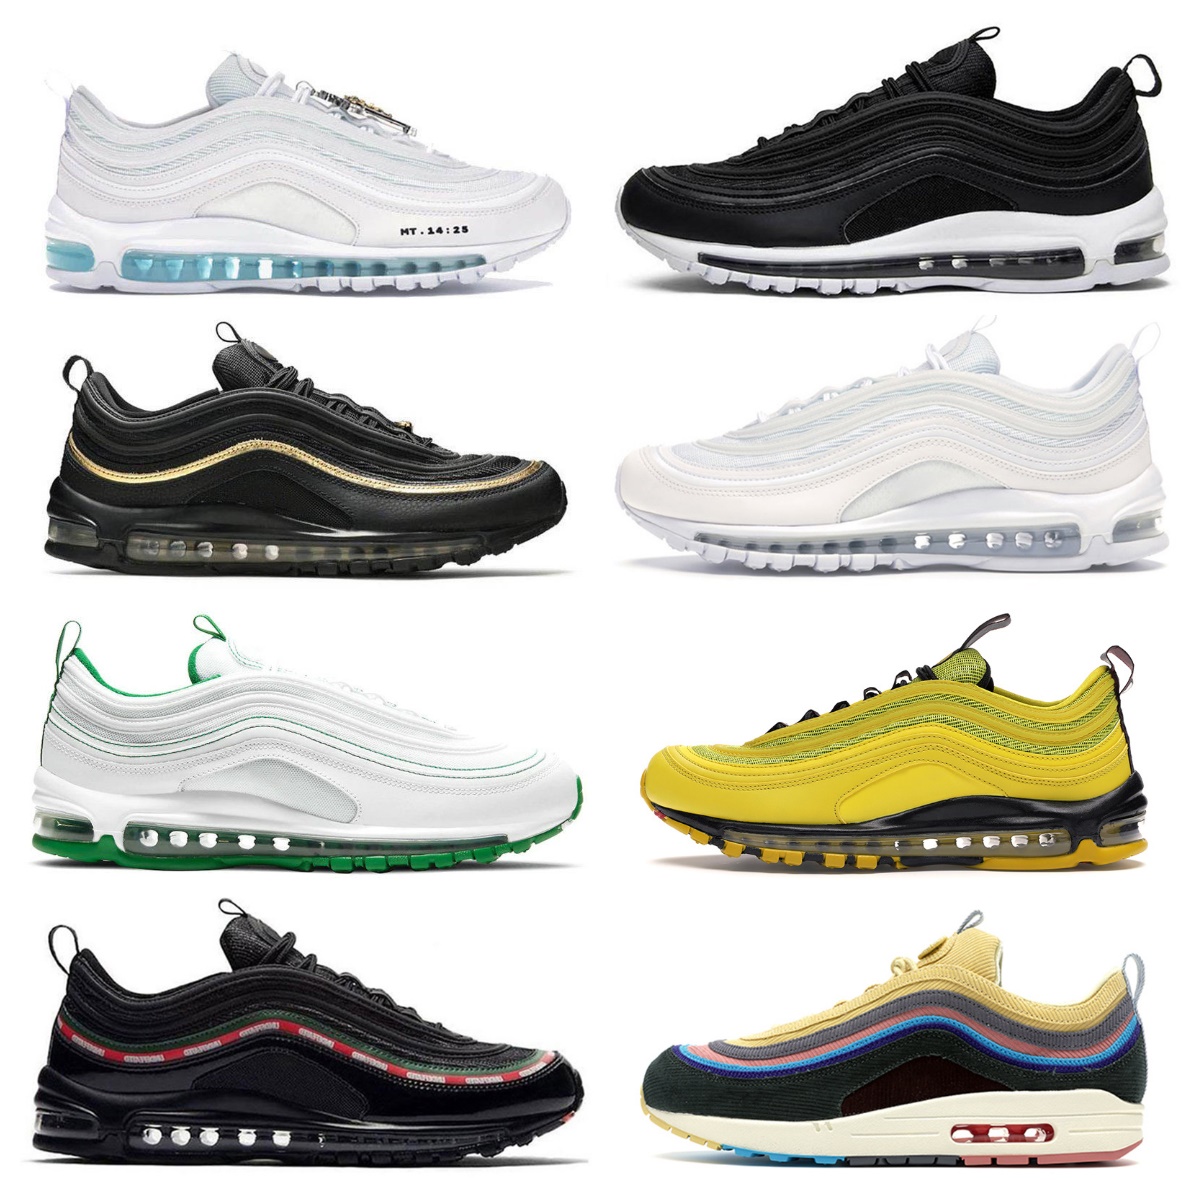 

97 97s Casual Shoes airs Mens Women Sean Wotherspoon mschf x inri jesus triple black white sliver bullet metalic gold max97 undefeated Bred Game Royal sports sneakers, Bubble package bag